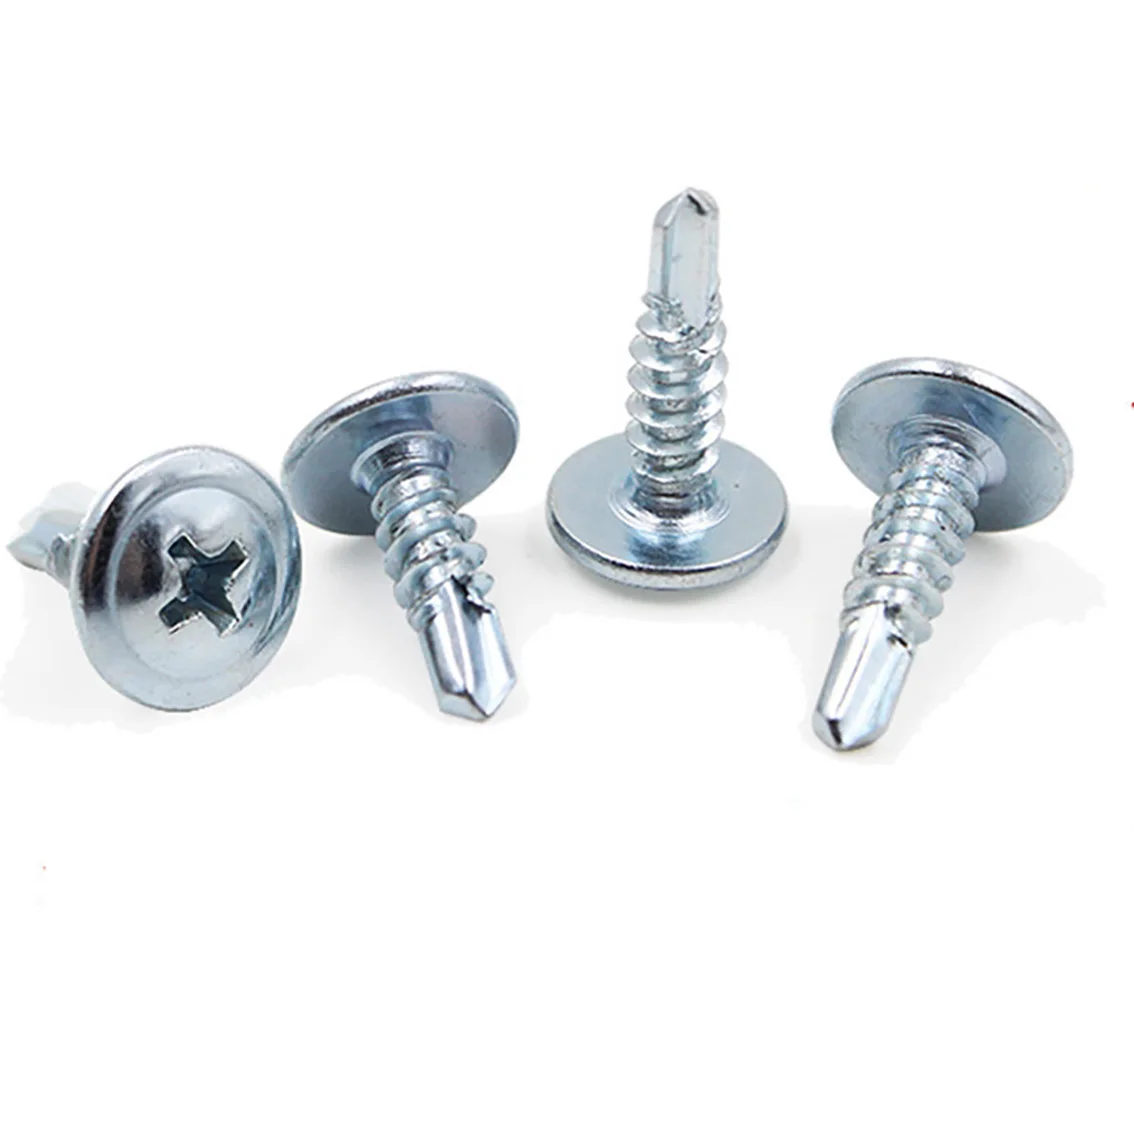 

M4.2 Phillips Round Head Drill Tail Self Tapping Screw Carbon Steel Zinc Plated Cross Truss Head With Pad Self Drilling Screws